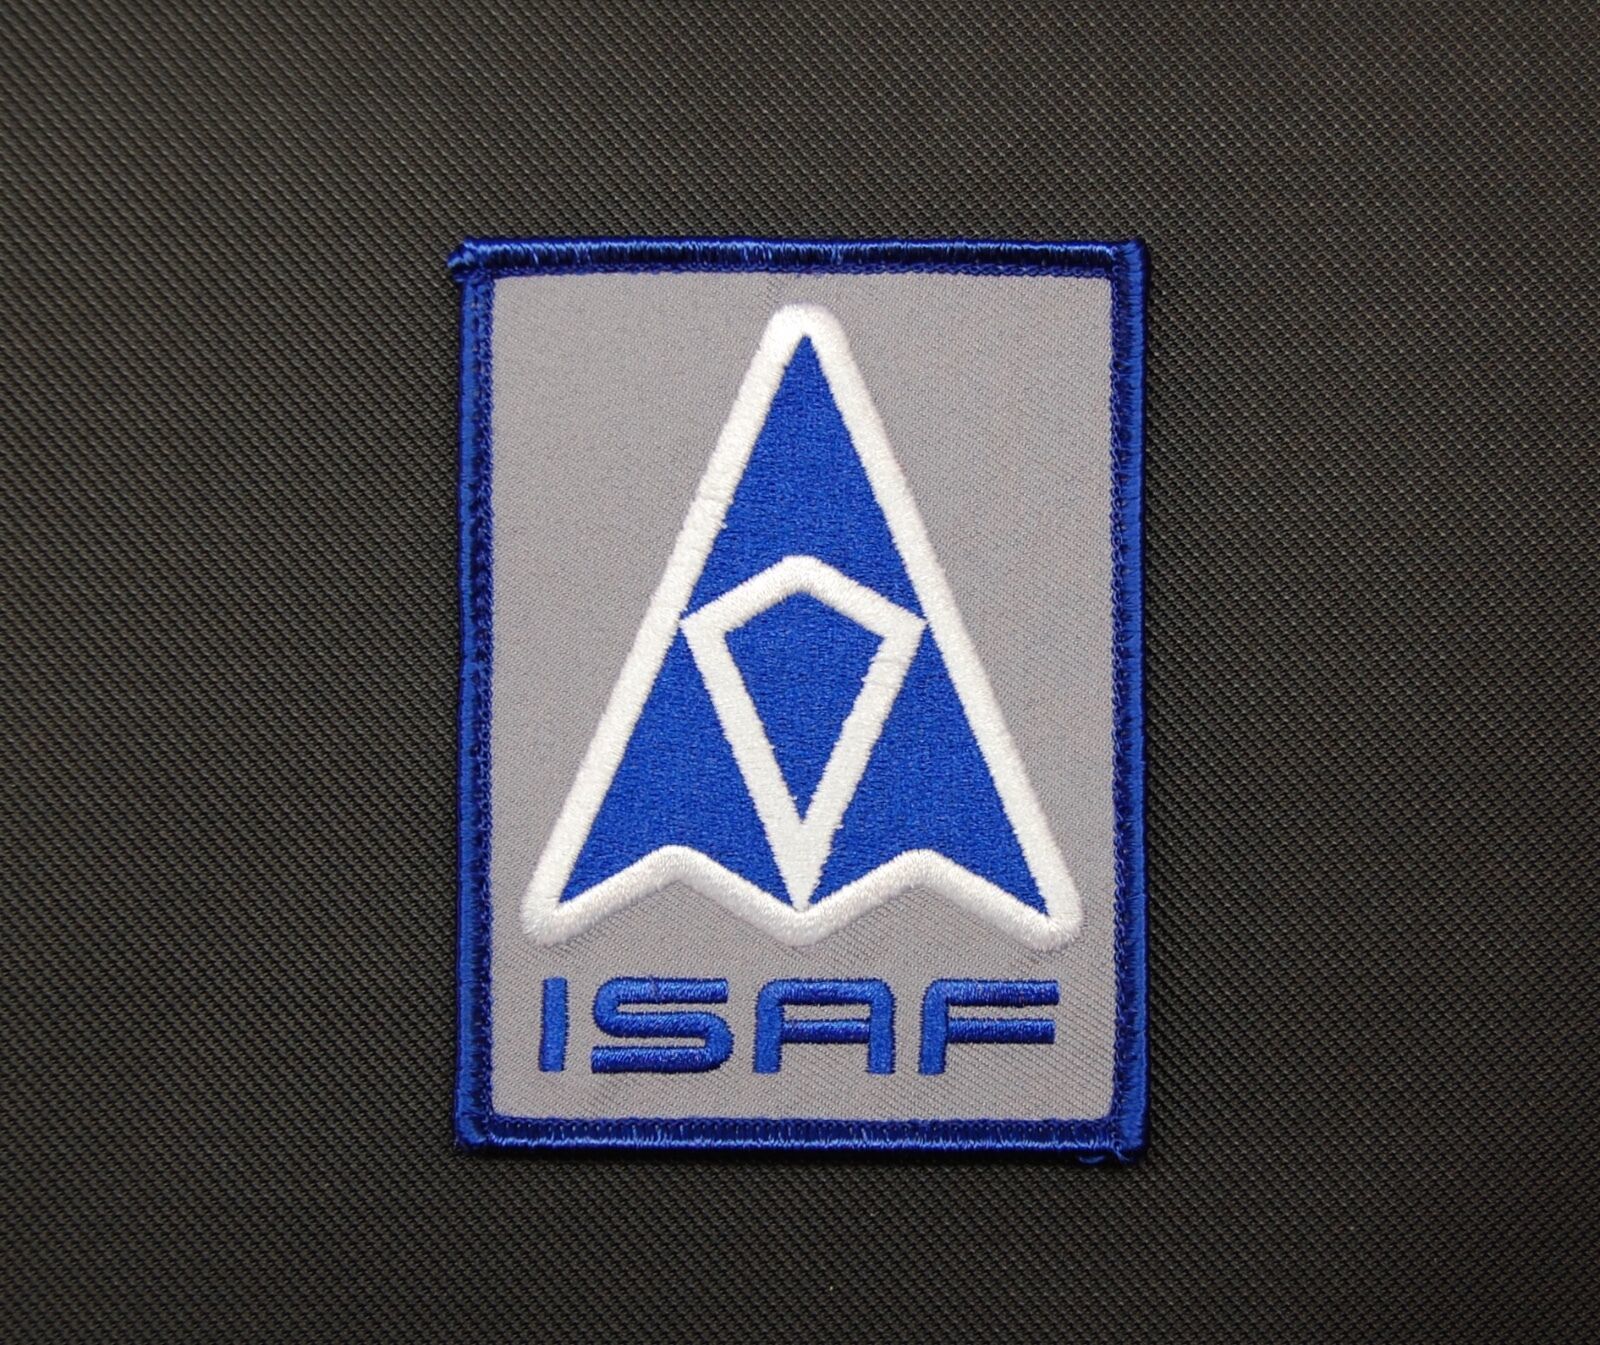 Primary image for Ace Combat Independent State Allied Forces ISAF Air Force Embroider Patch Hook